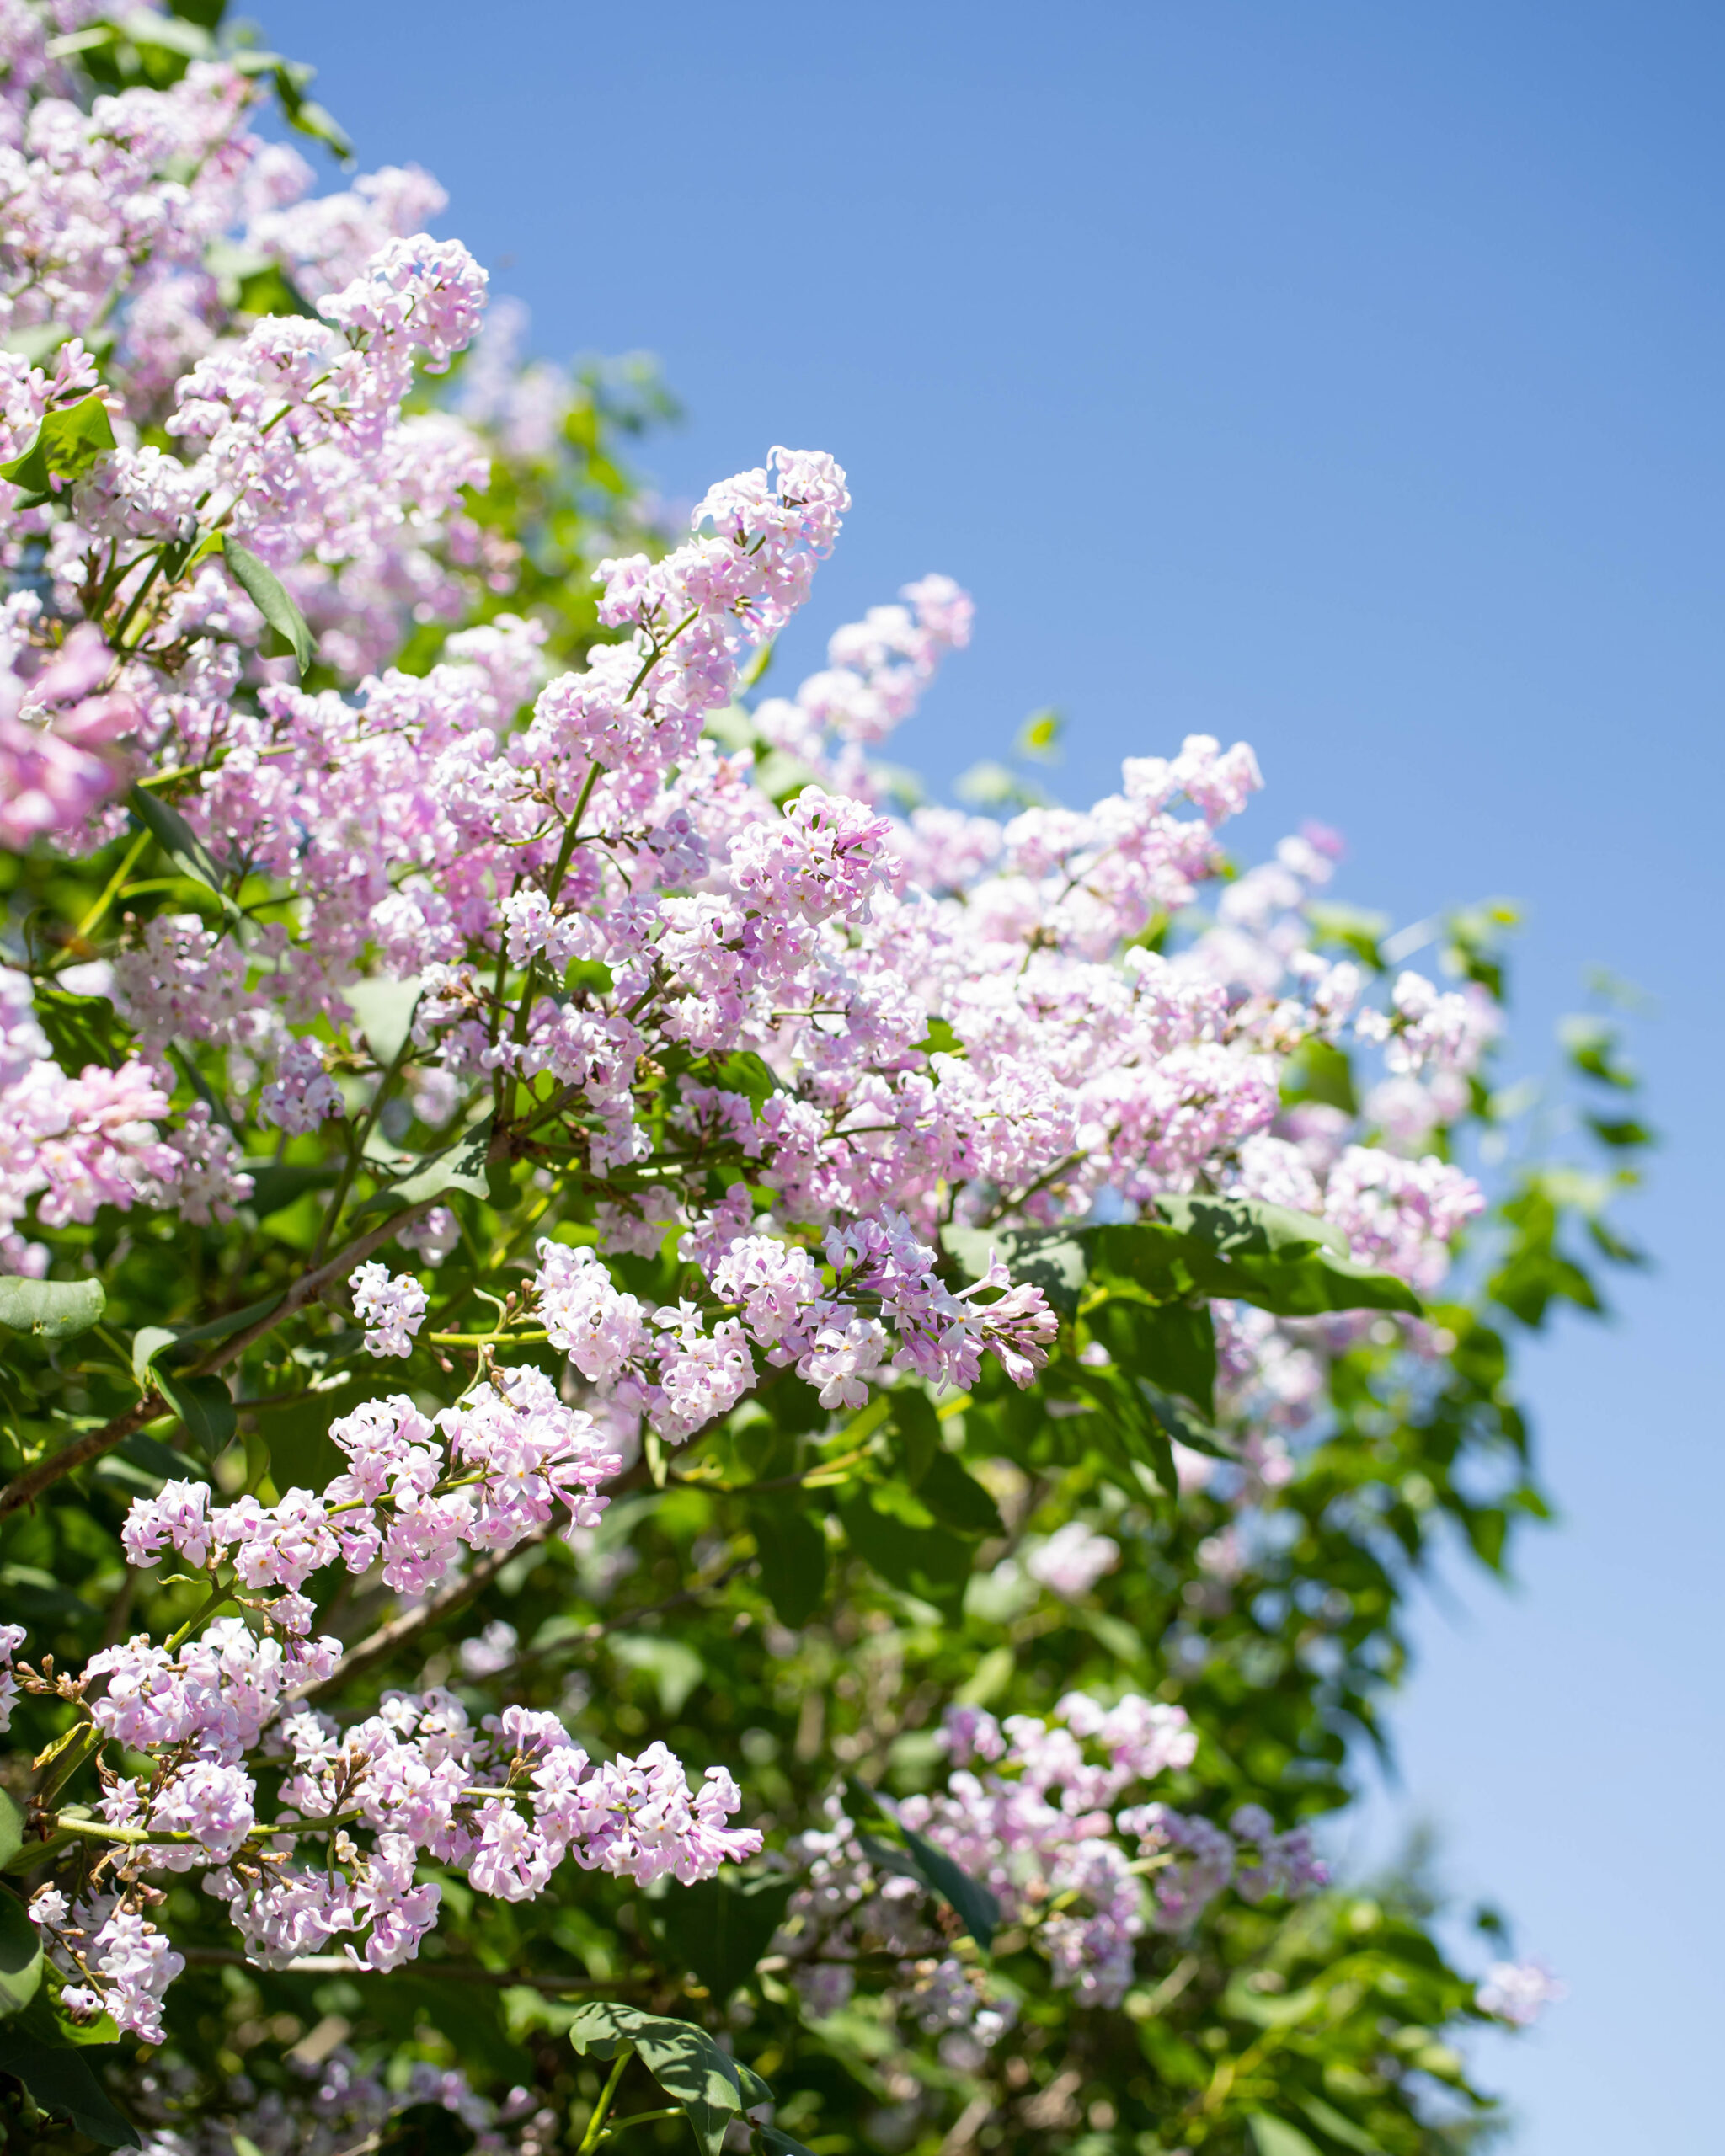 With a few clever tricks, you can keep cut lilacs from wilting so you can enjoy them in your home for longer! Well, for as long as the season lasts at least! :)